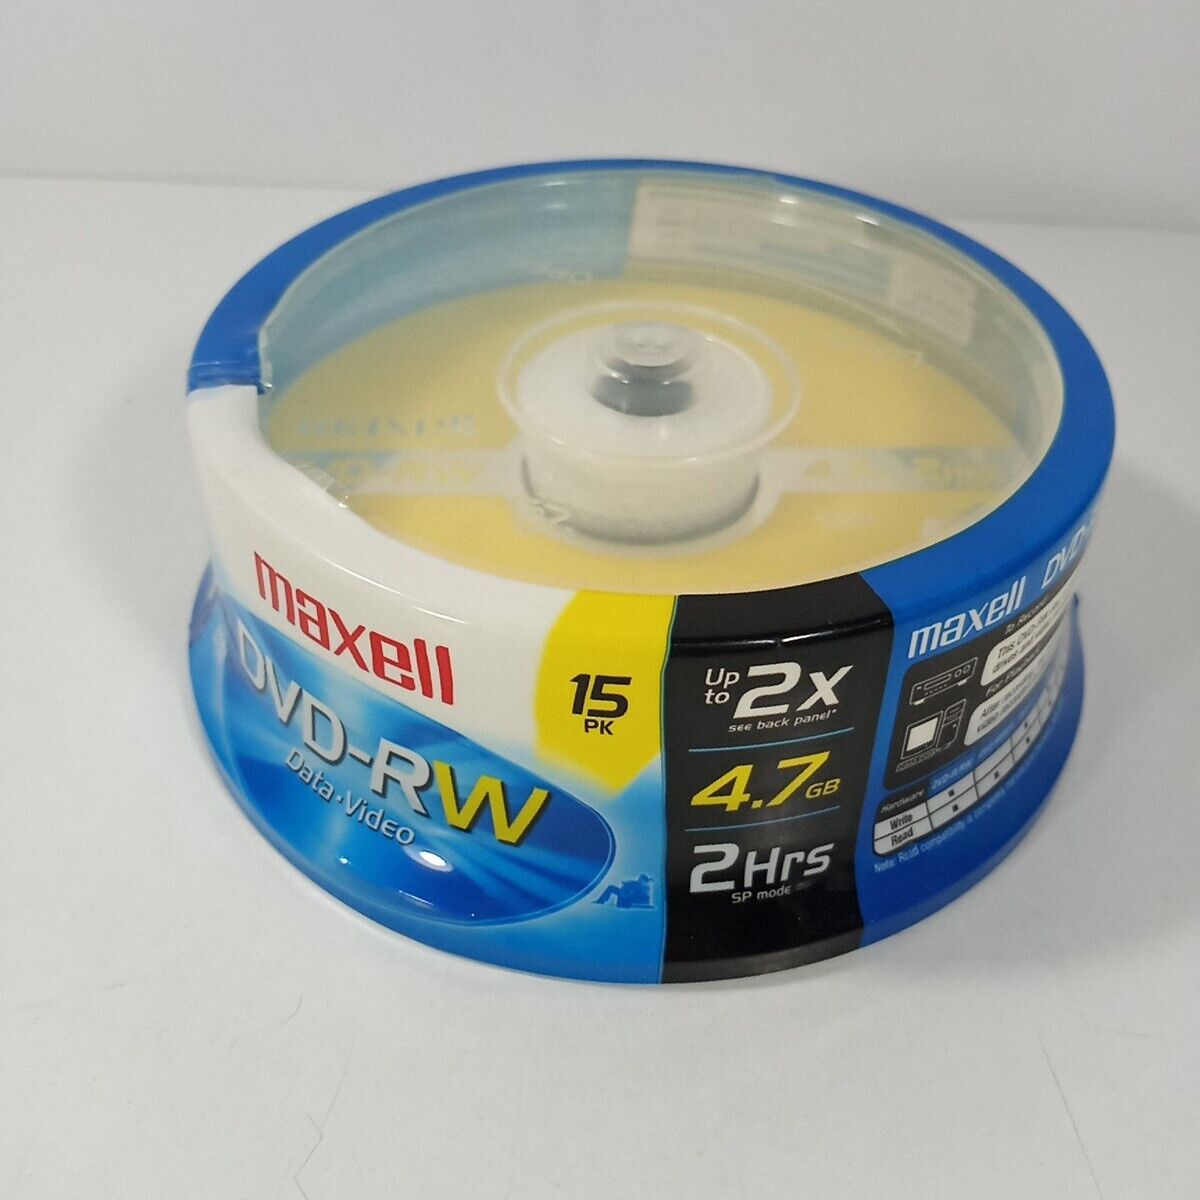 Maxell DVD+RW Discs, 4.7GB, 2x, Spindle, 15/Pack New Sealed